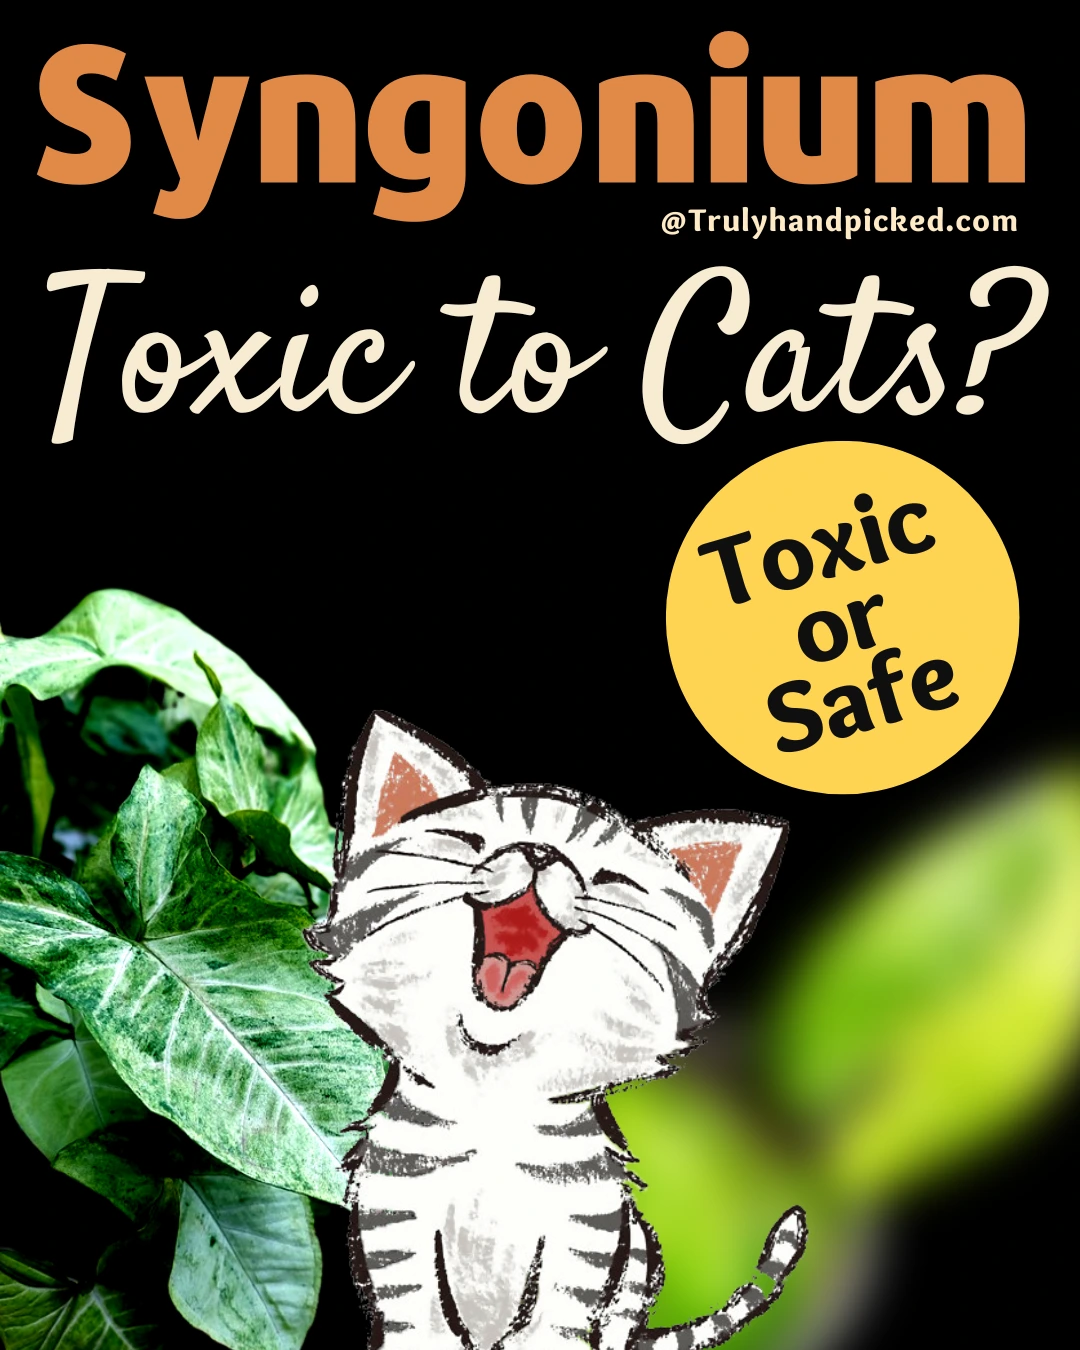 Is Syngonium Toxic to Cats Yes It Is